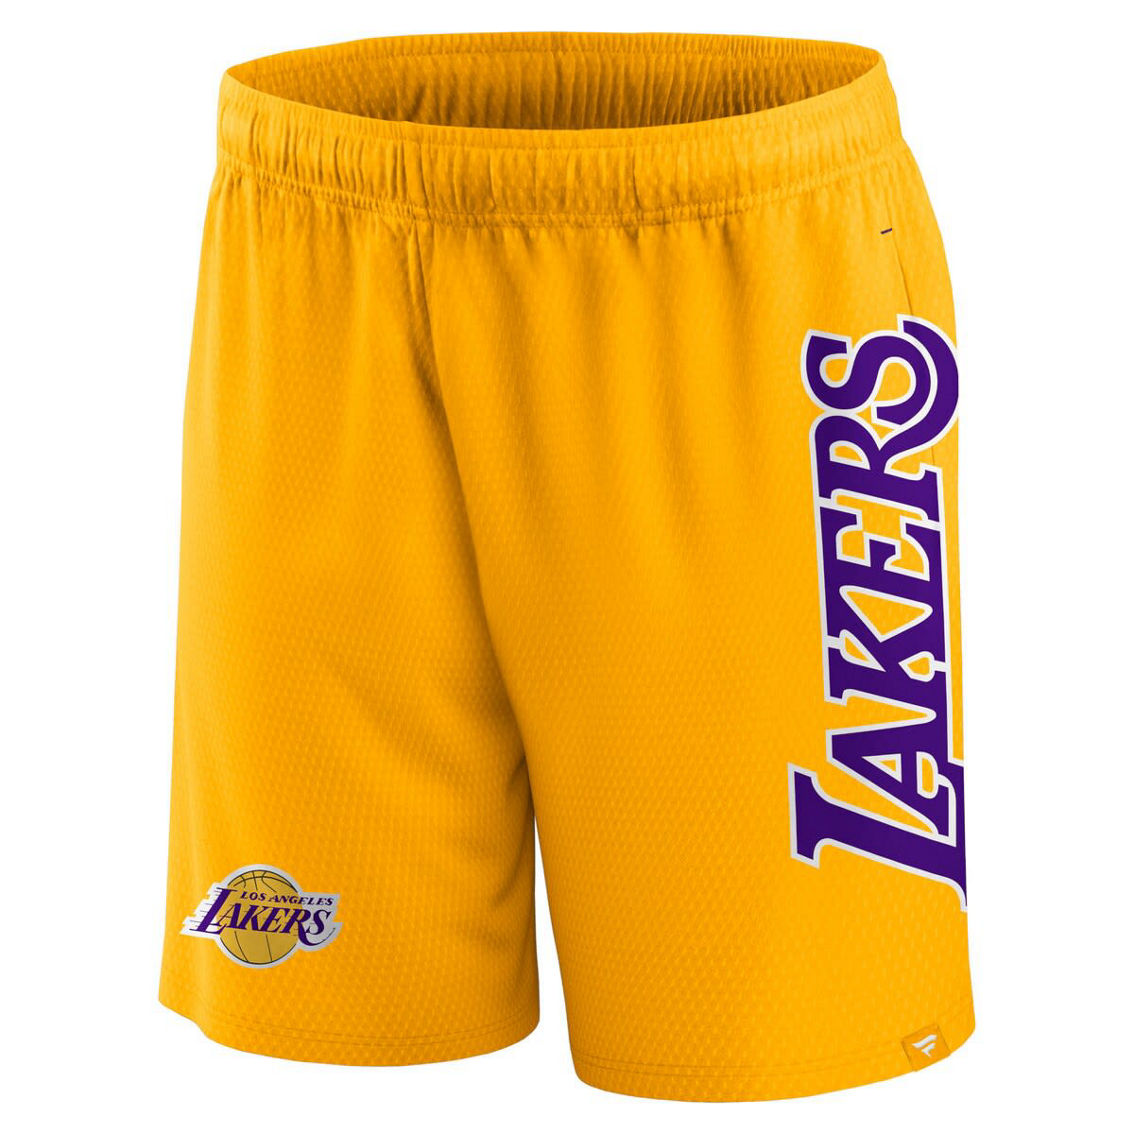 Fanatics Branded Men's Gold Los Angeles Lakers Up Mesh Shorts - Image 3 of 4